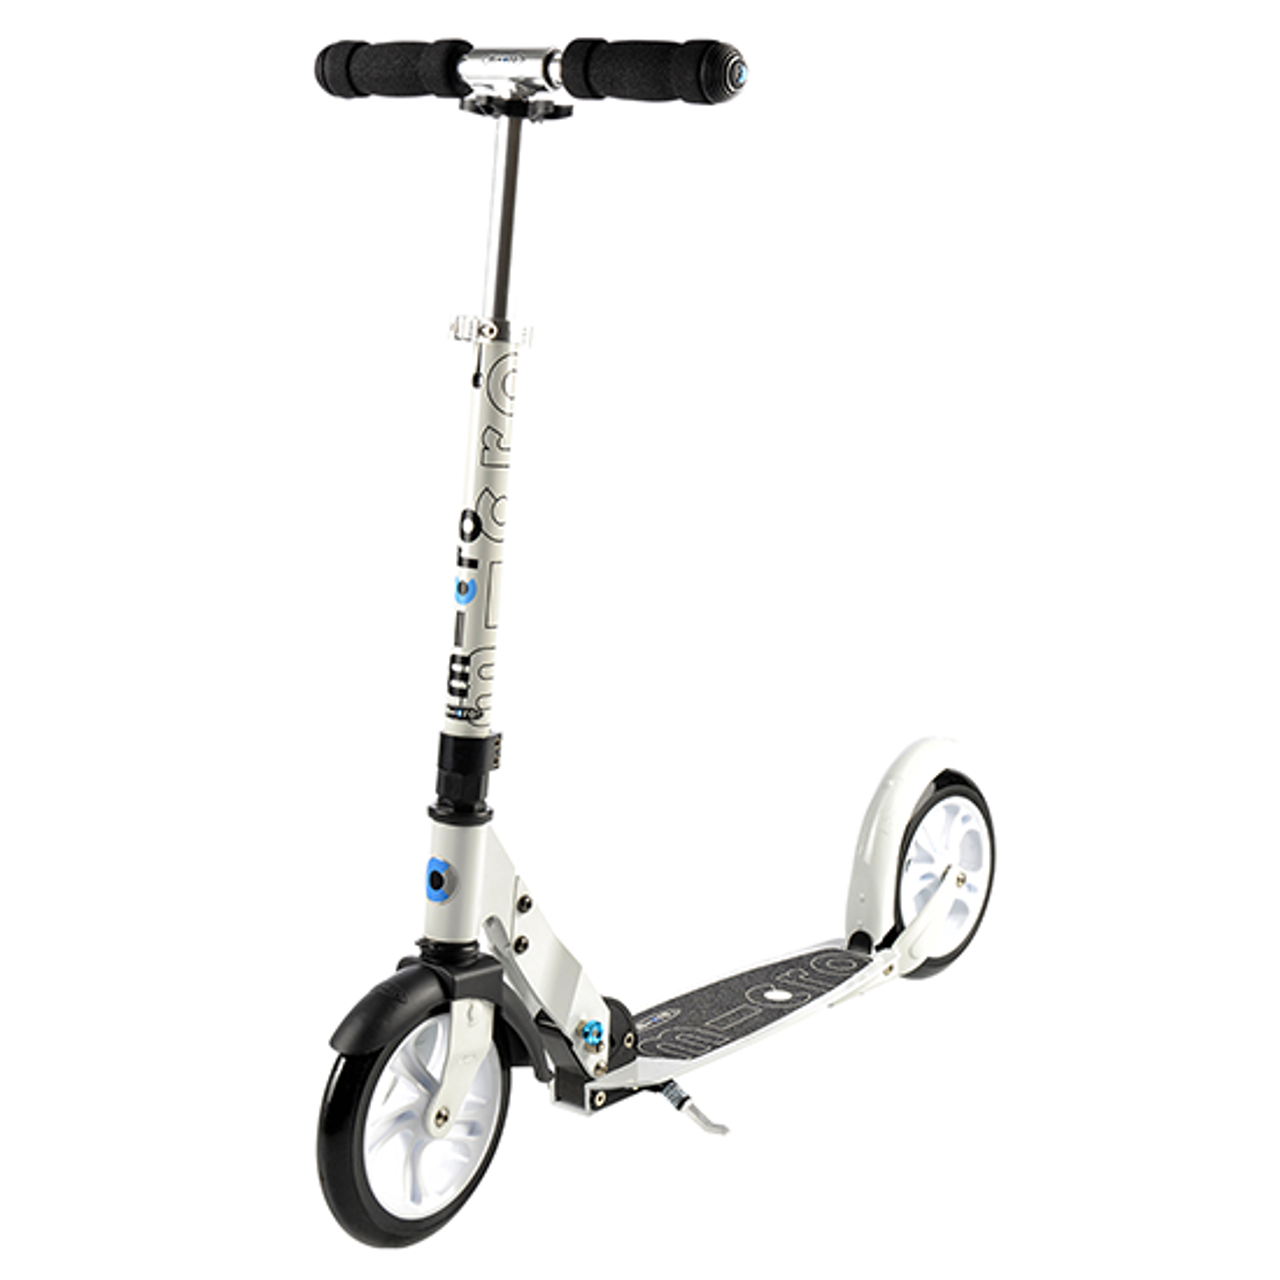 Micro Flex Scooter, Adult Scooter